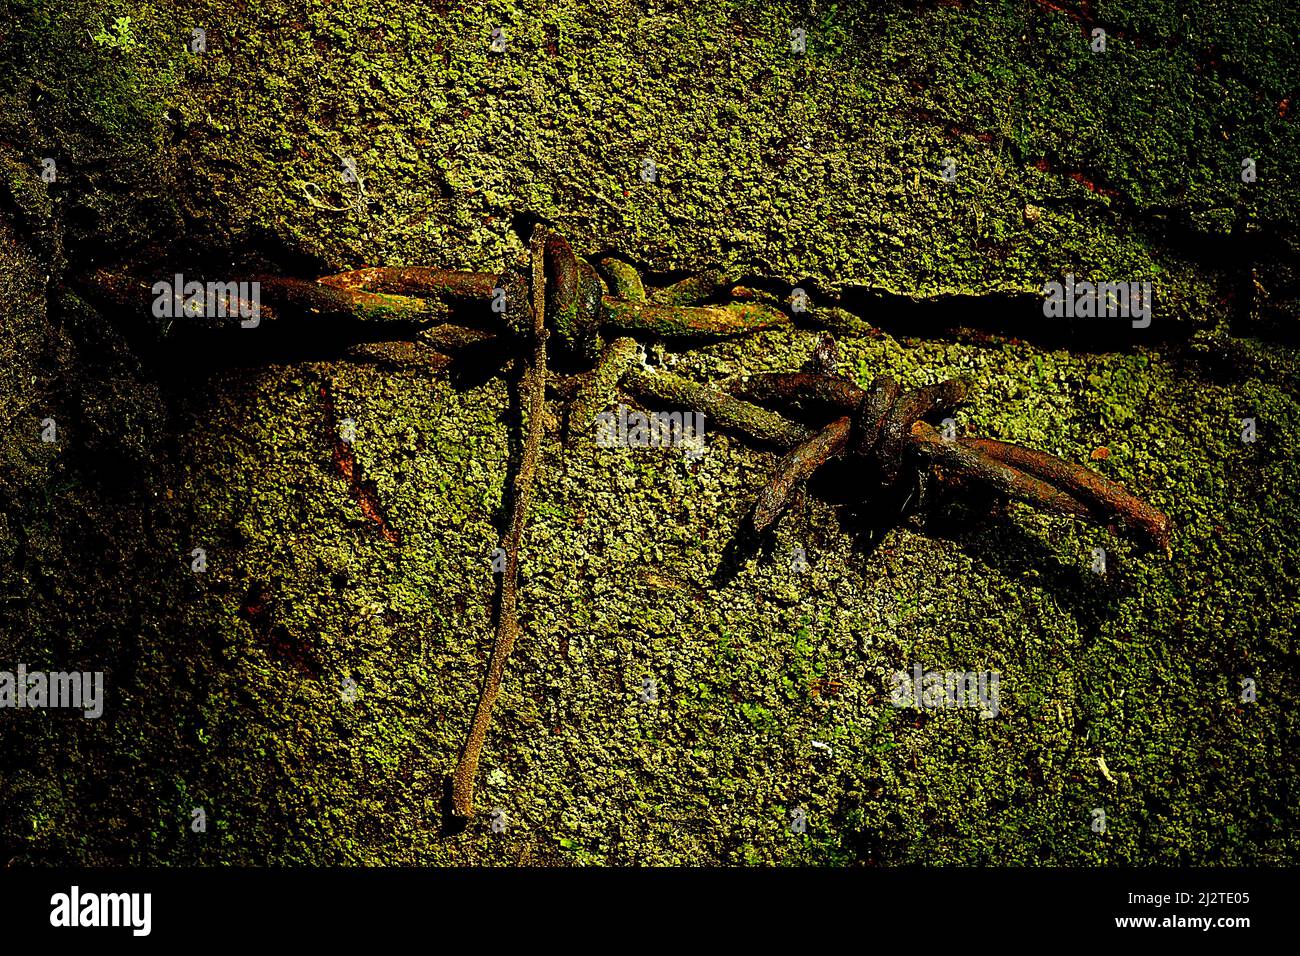 Section of barbed wire embedded in growing tree trunk Stock Photo